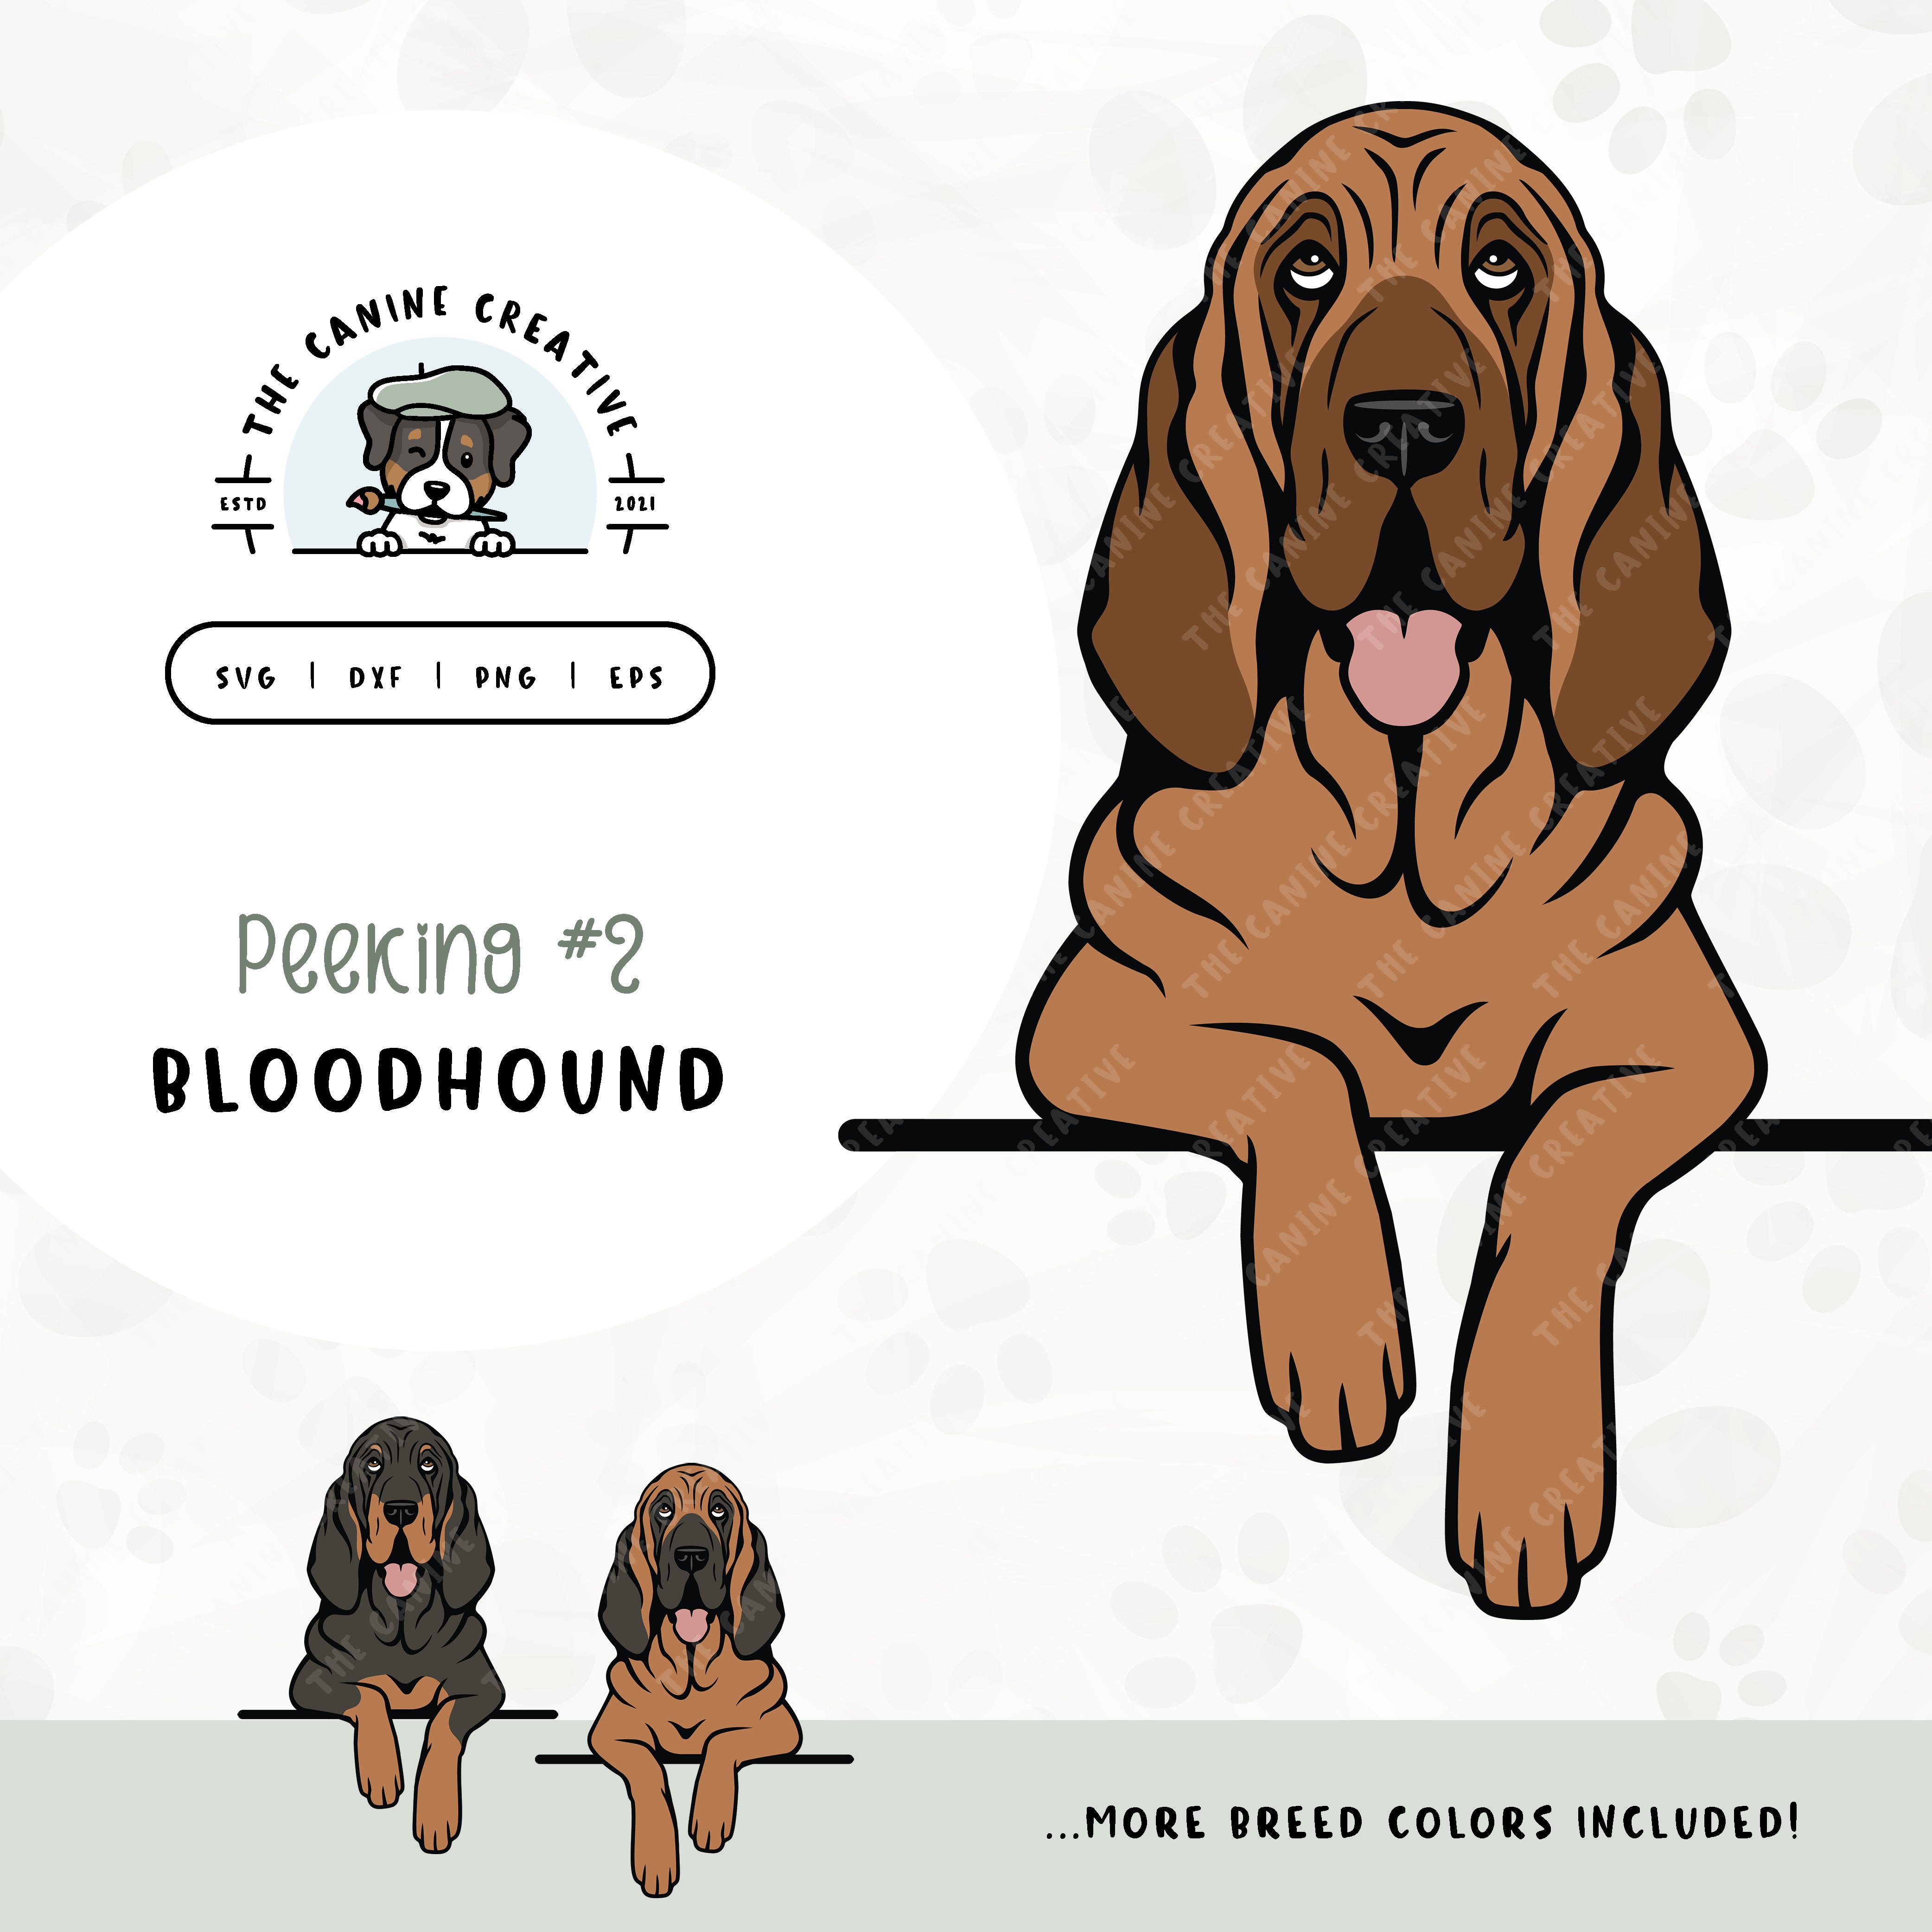 This illustrated design features a peeking Bloodhound. File formats include: SVG, DXF, PNG, and EPS.